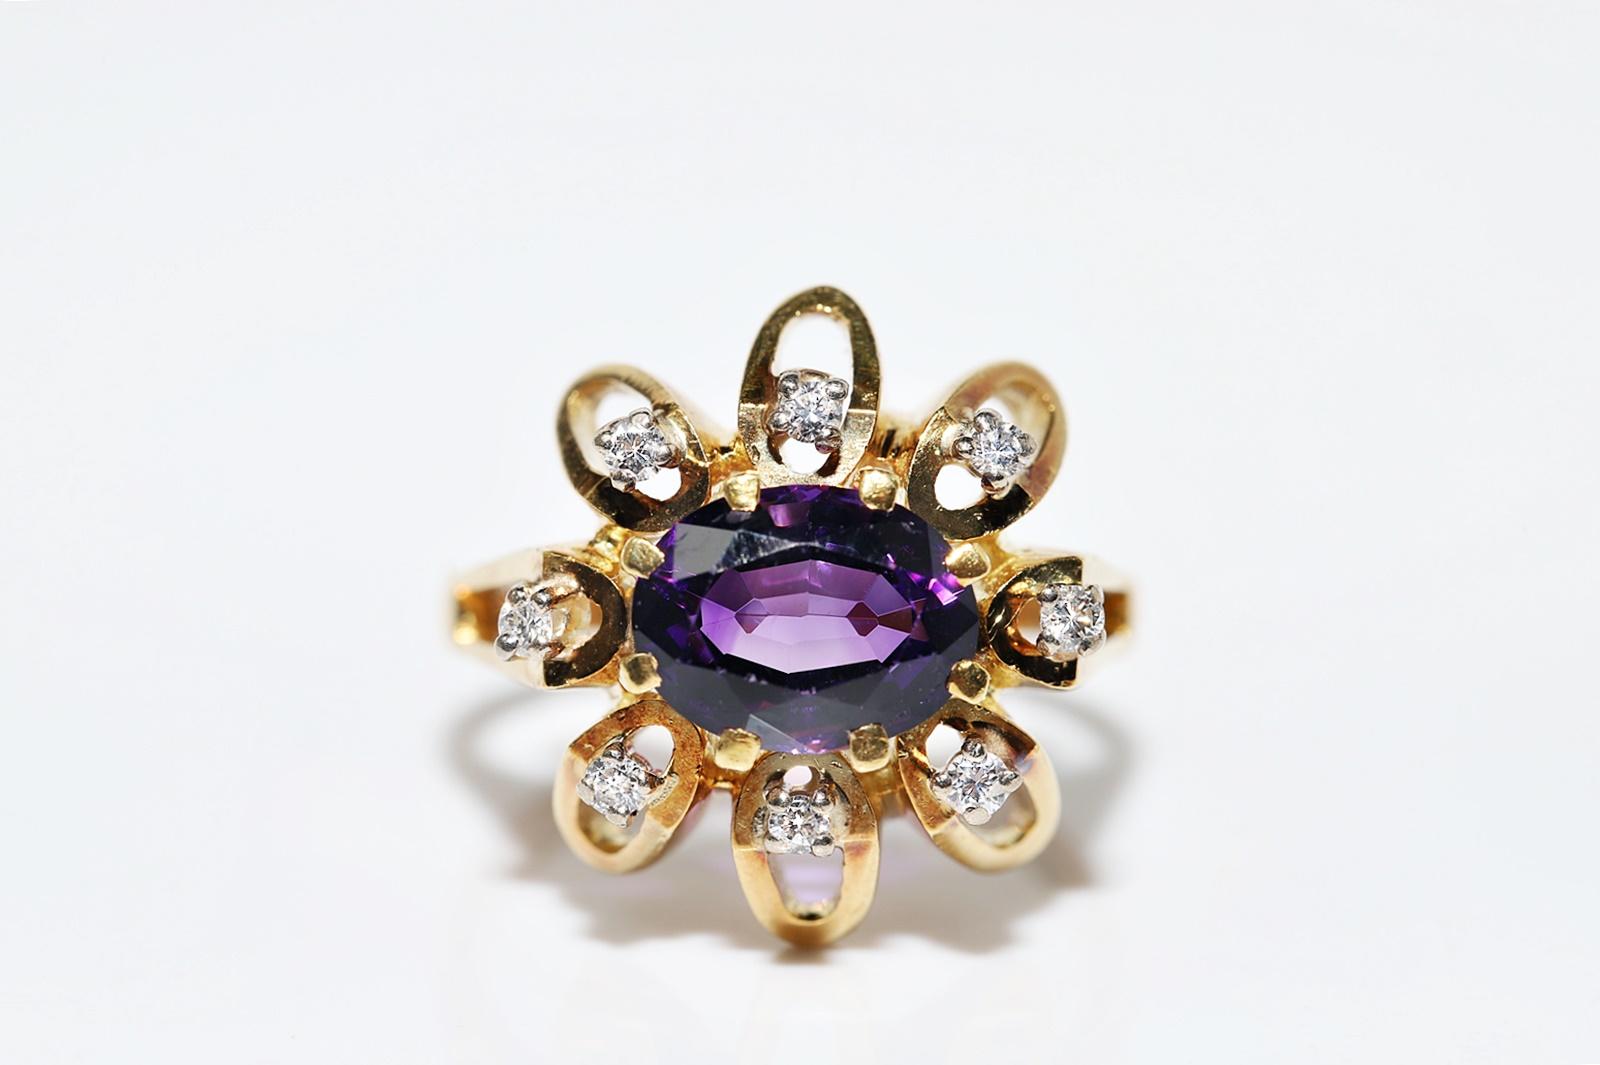 Brilliant Cut Vintage Circa 1980s 18k Gold Natural Diamond And Amethyst Decorated Ring For Sale